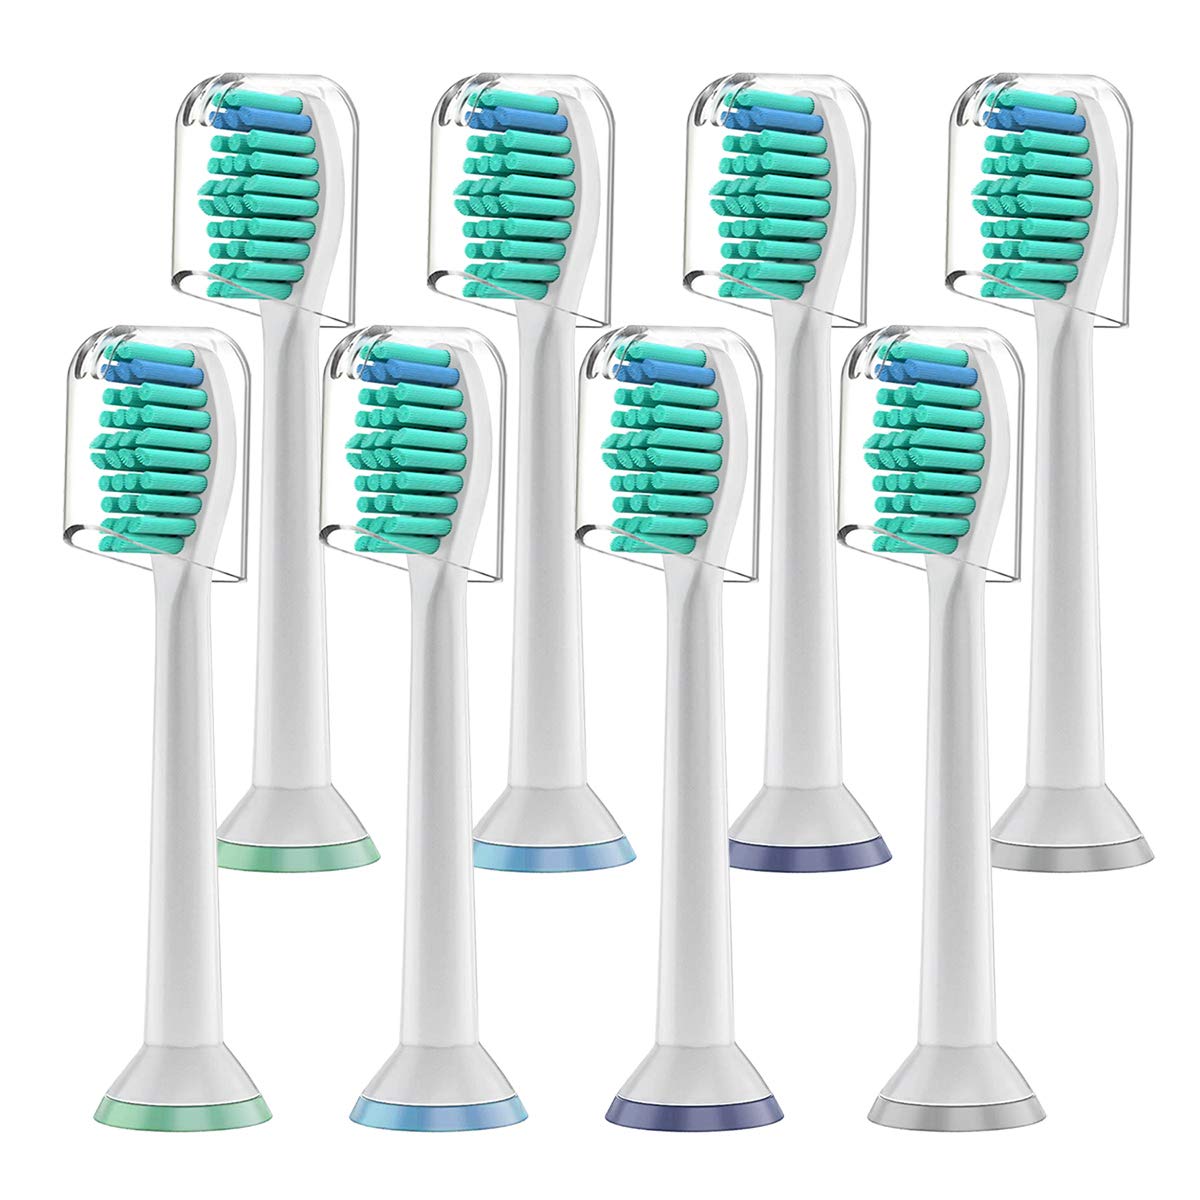 8 Pack Standard Replacement Toothbrush Heads for Philips Sonicare Electric Toothbrush Brush Heads Compatible with ProResults DiamondClean FlexCare HealthyWhite EasyClean HydroClean PowerUp Gum Health